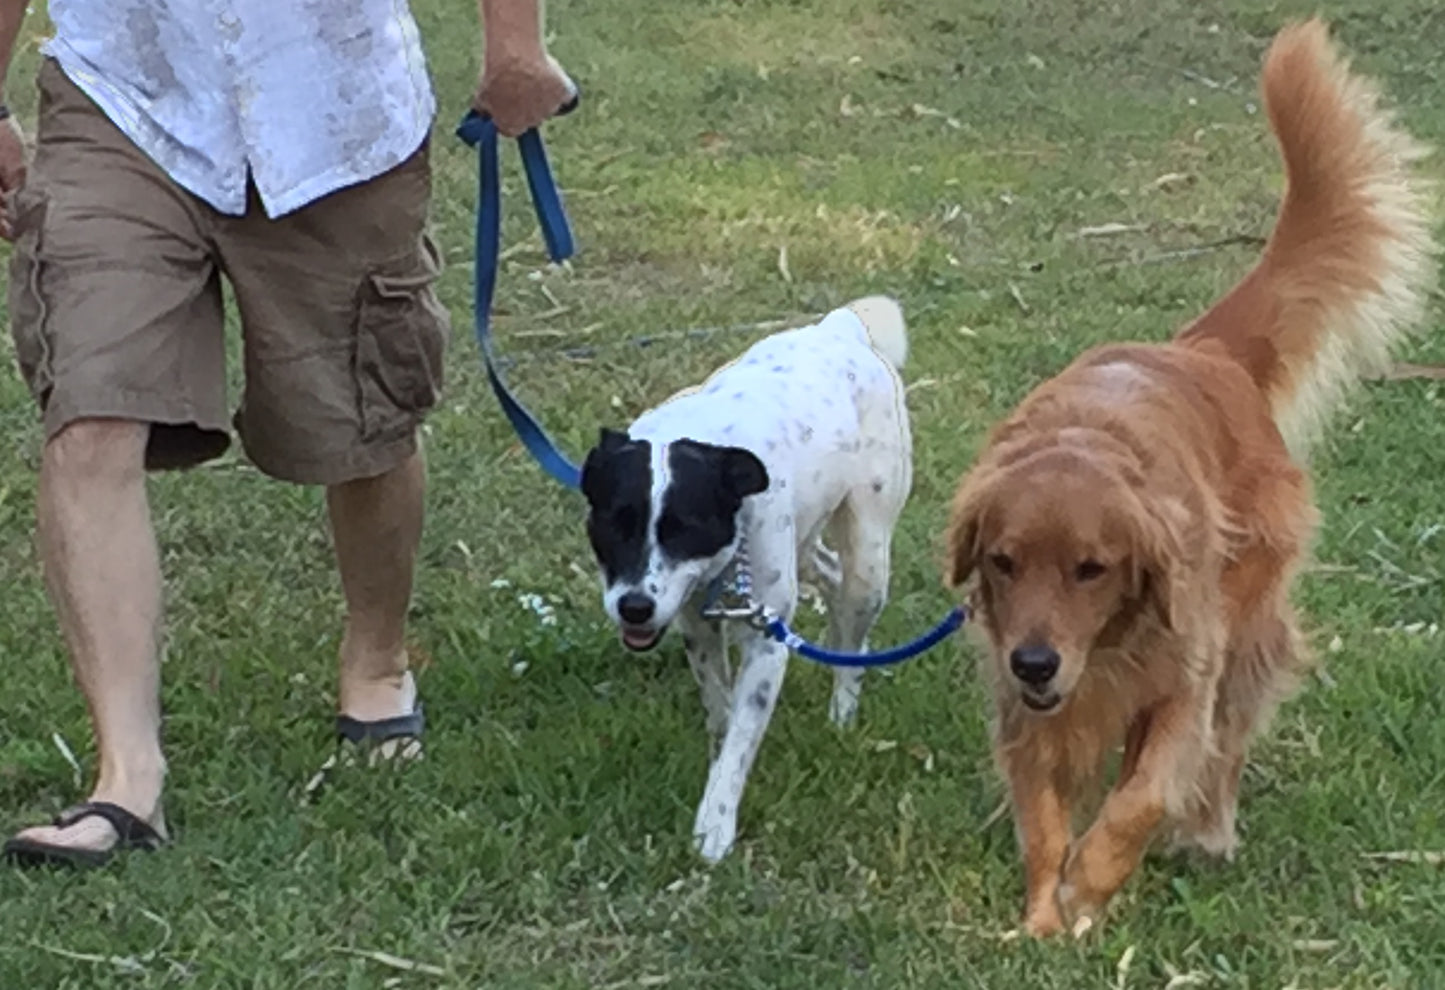 An owner wearing cargo shorts with only their legs visible walks 2 dogs on a regular leash with a Dog coupler. A White dog with black spots & pointy ears is on the regular leash and clipped together to a golden retriever with the Dog Coupler by the other loop in their collar. 